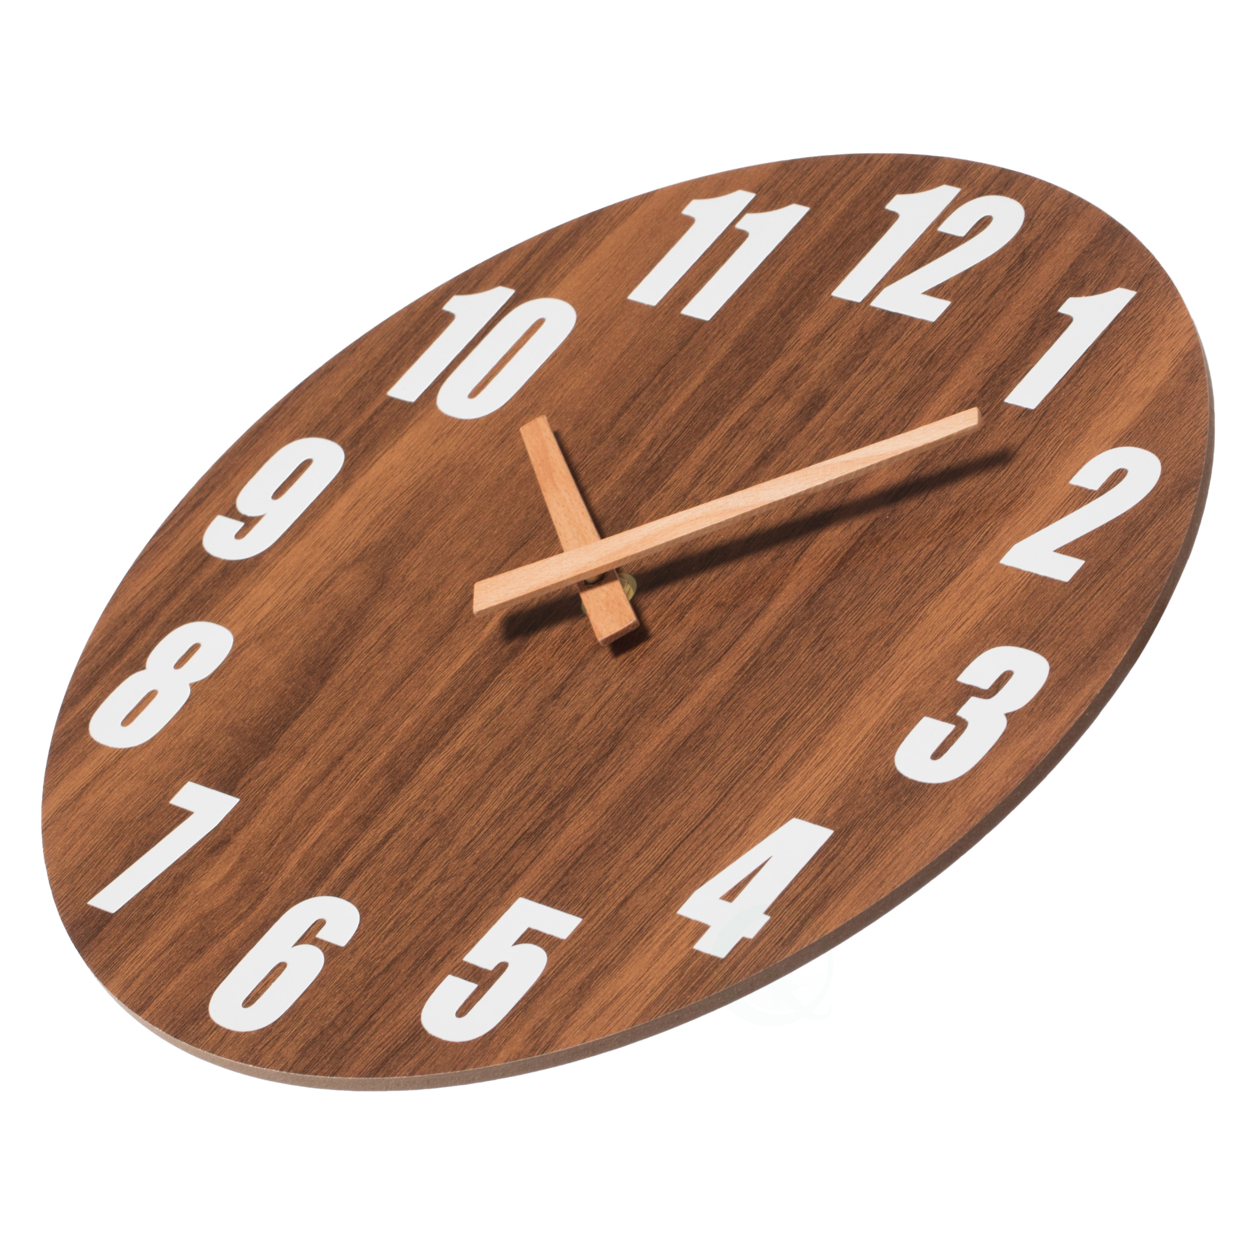 Antique Home Decor Wall Clock For Living Room, Bedroom, Kitchen, Or Dining Room, Brown Natural Wood